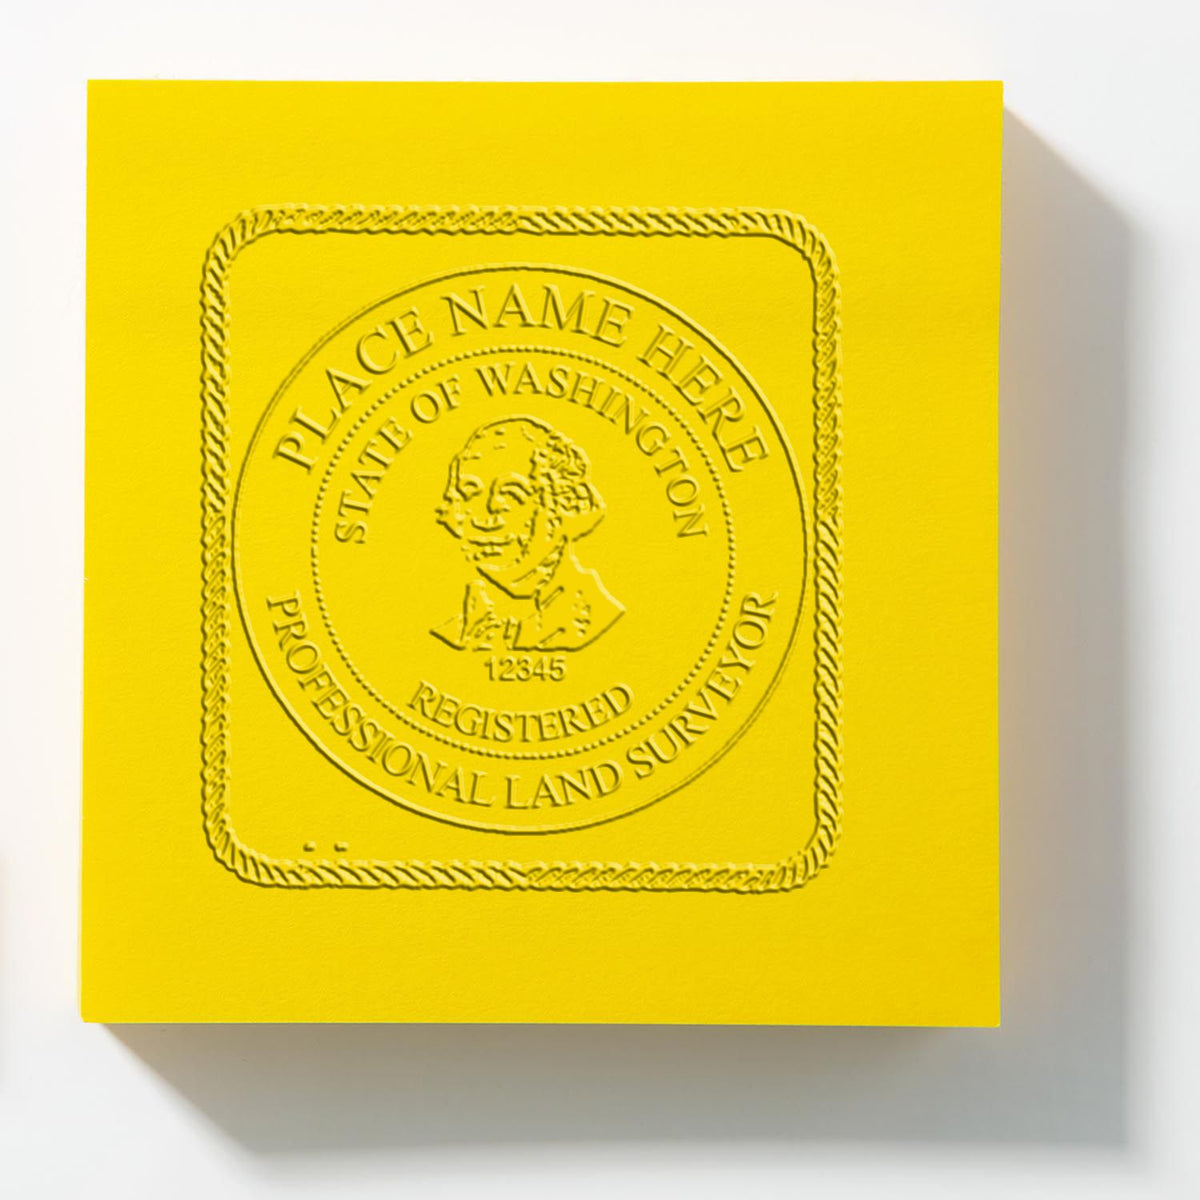 An in use photo of the Gift Washington Land Surveyor Seal showing a sample imprint on a cardstock